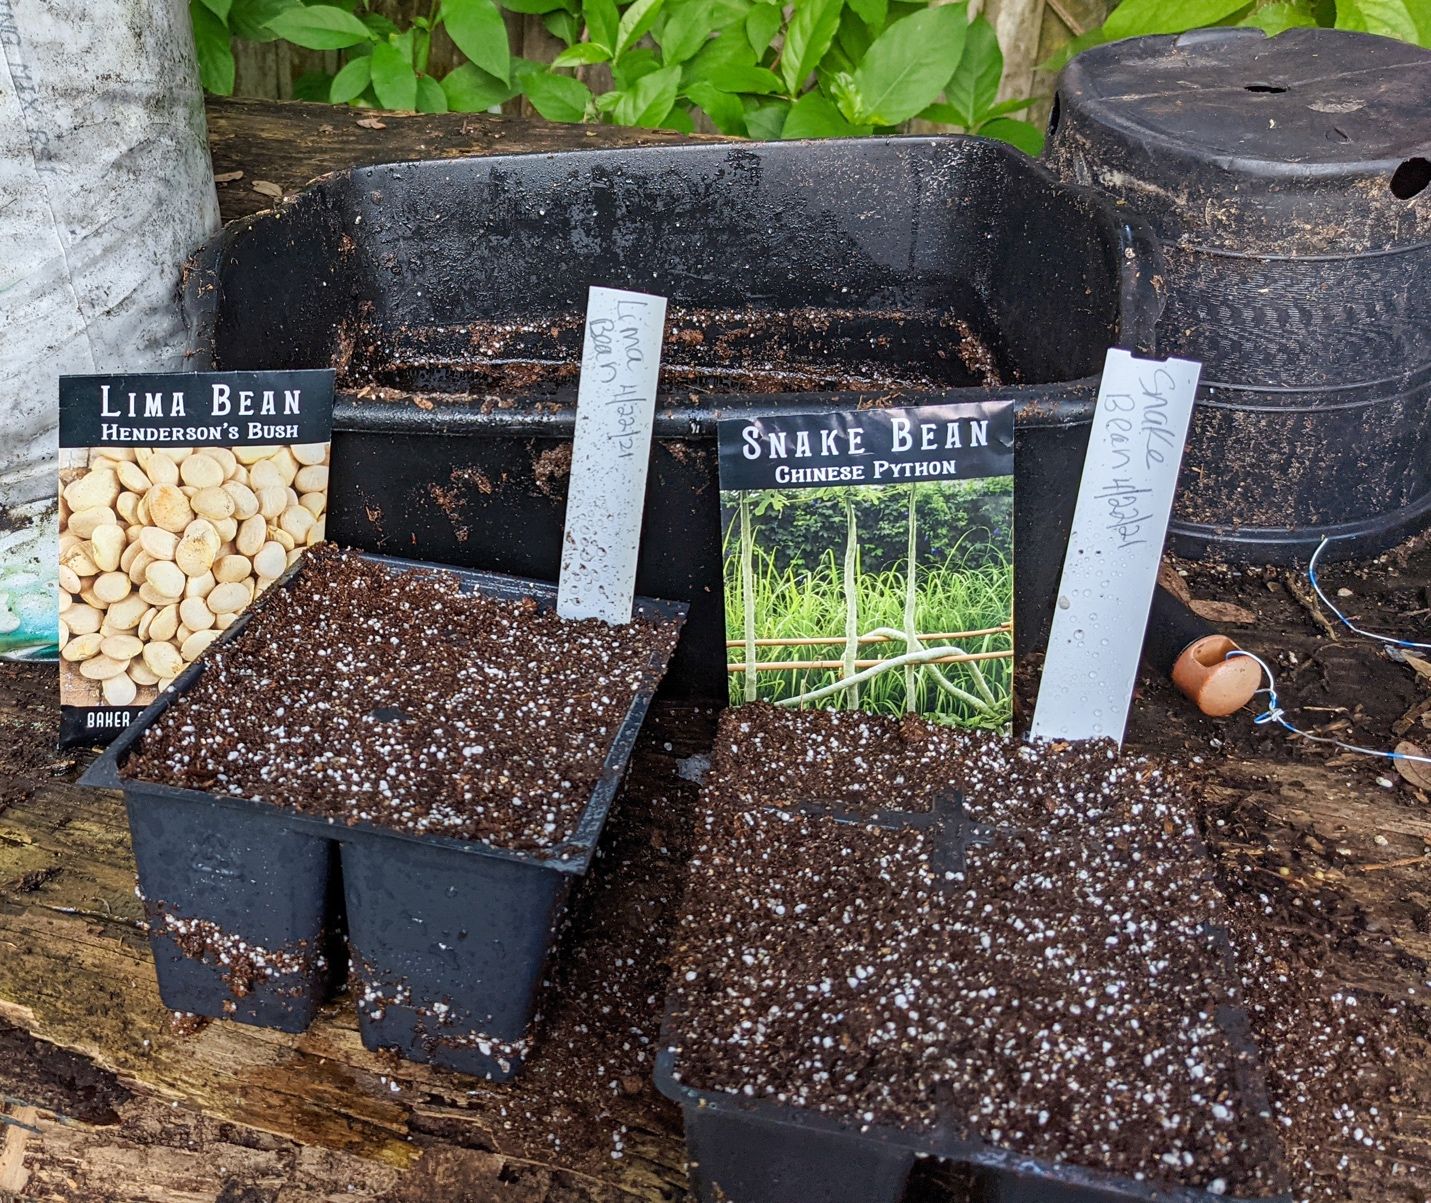 A potting bench with some supplies typically needed for producing transplants, including potting media, seeds, trays, and labels. 